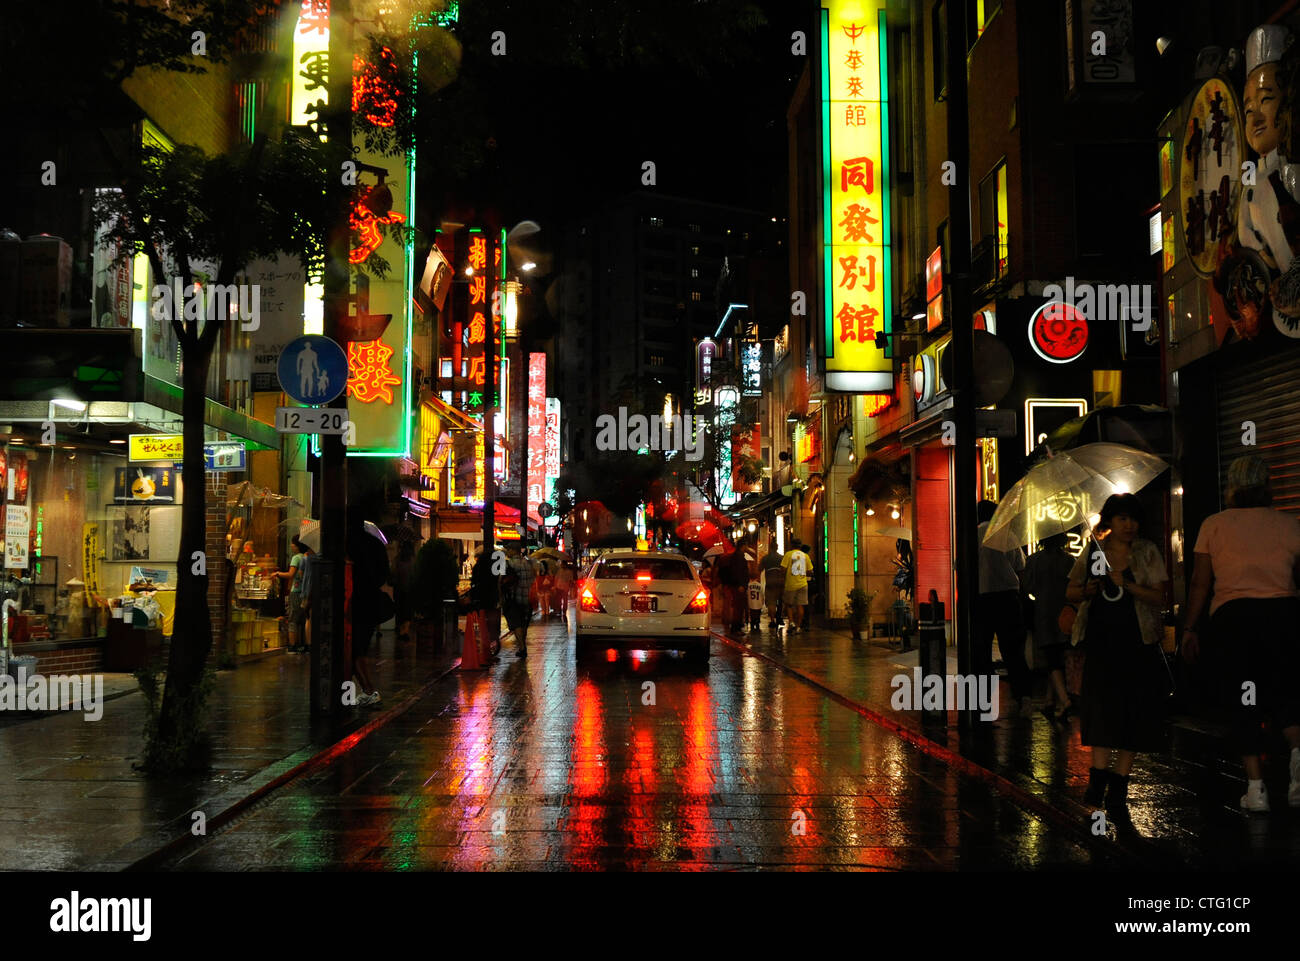 A car is pictured through a rain-covered windscreen on a street in China Town in Yokohama, Japan Stock Photo